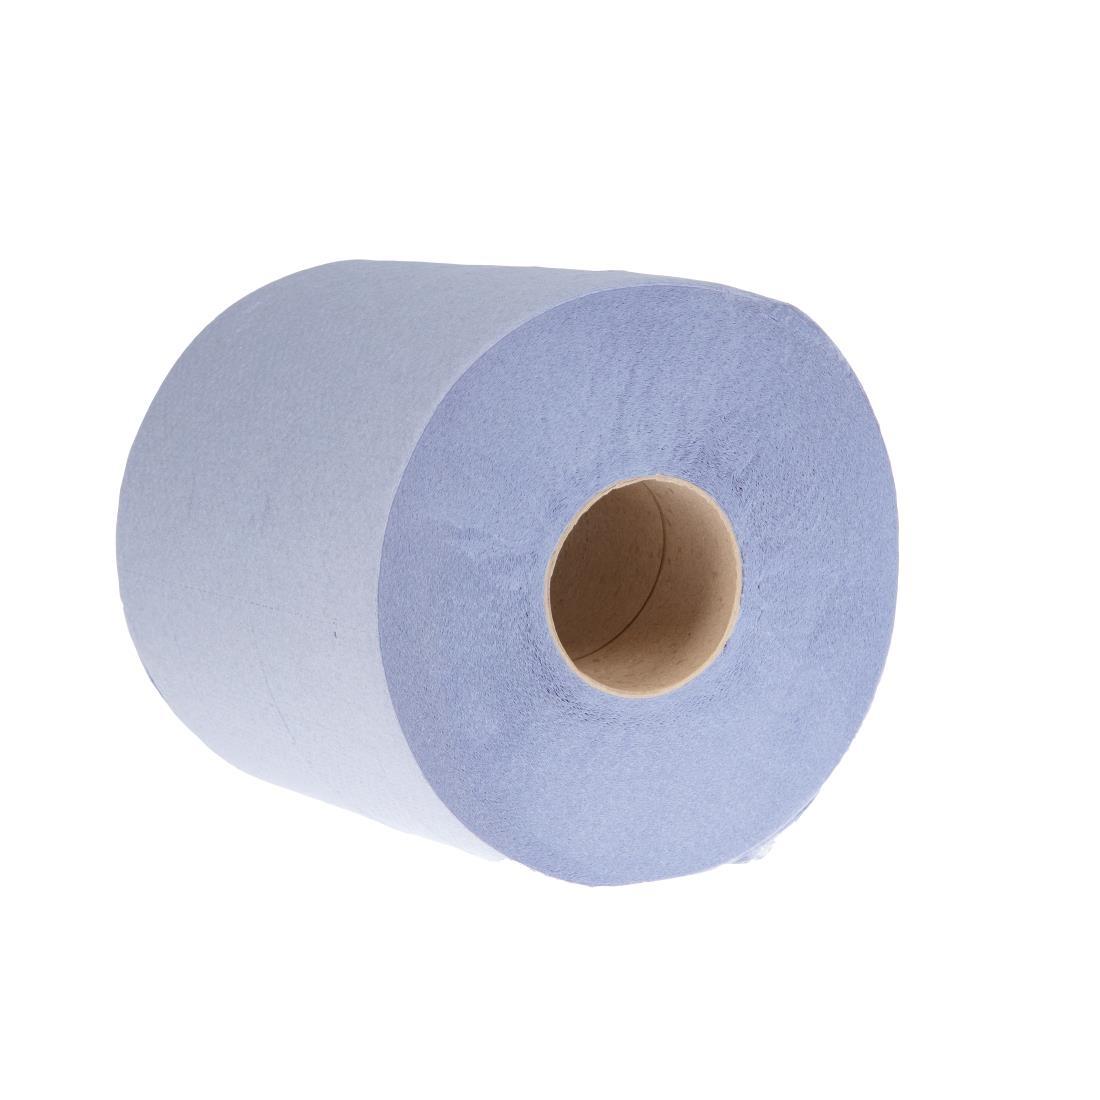 Jantex Centrefeed Blue Rolls 2-Ply 120m (Pack of 6) - DL921  - 6